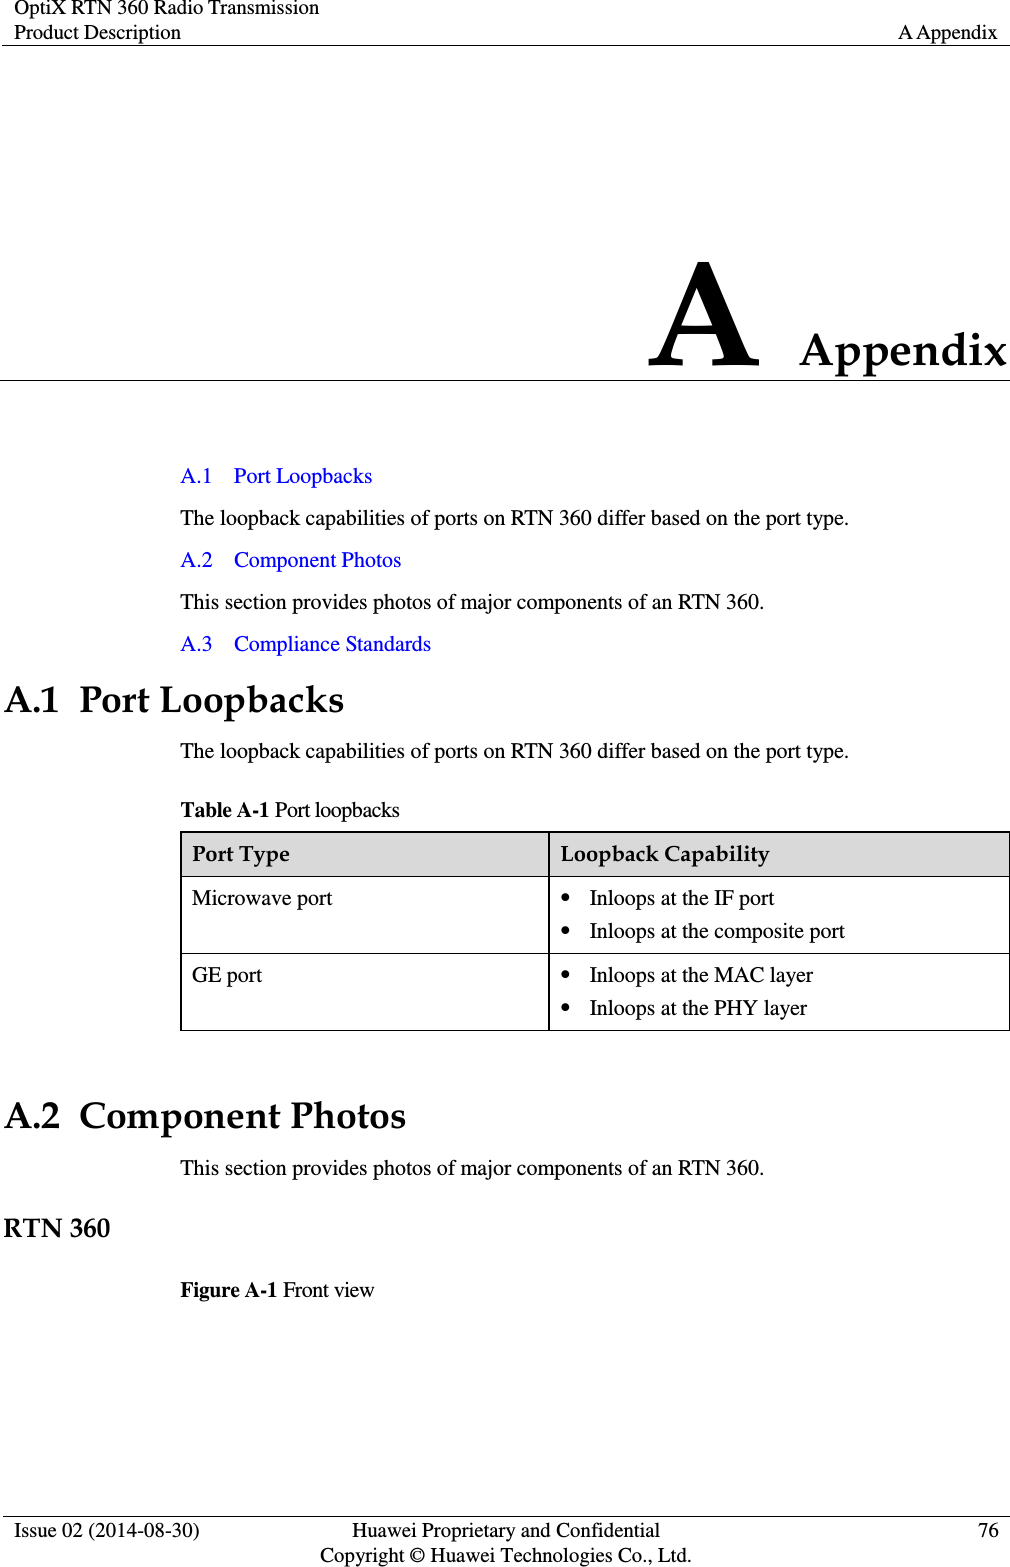 OptiX RTN 360 Radio Transmission Product Description A Appendix  Issue 02 (2014-08-30) Huawei Proprietary and Confidential                                     Copyright © Huawei Technologies Co., Ltd. 76  A Appendix A.1    Port Loopbacks The loopback capabilities of ports on RTN 360 differ based on the port type. A.2    Component Photos This section provides photos of major components of an RTN 360. A.3    Compliance Standards A.1  Port Loopbacks The loopback capabilities of ports on RTN 360 differ based on the port type. Table A-1 Port loopbacks Port Type Loopback Capability Microwave port  Inloops at the IF port  Inloops at the composite port   GE port  Inloops at the MAC layer  Inloops at the PHY layer  A.2  Component Photos This section provides photos of major components of an RTN 360. RTN 360 Figure A-1 Front view 